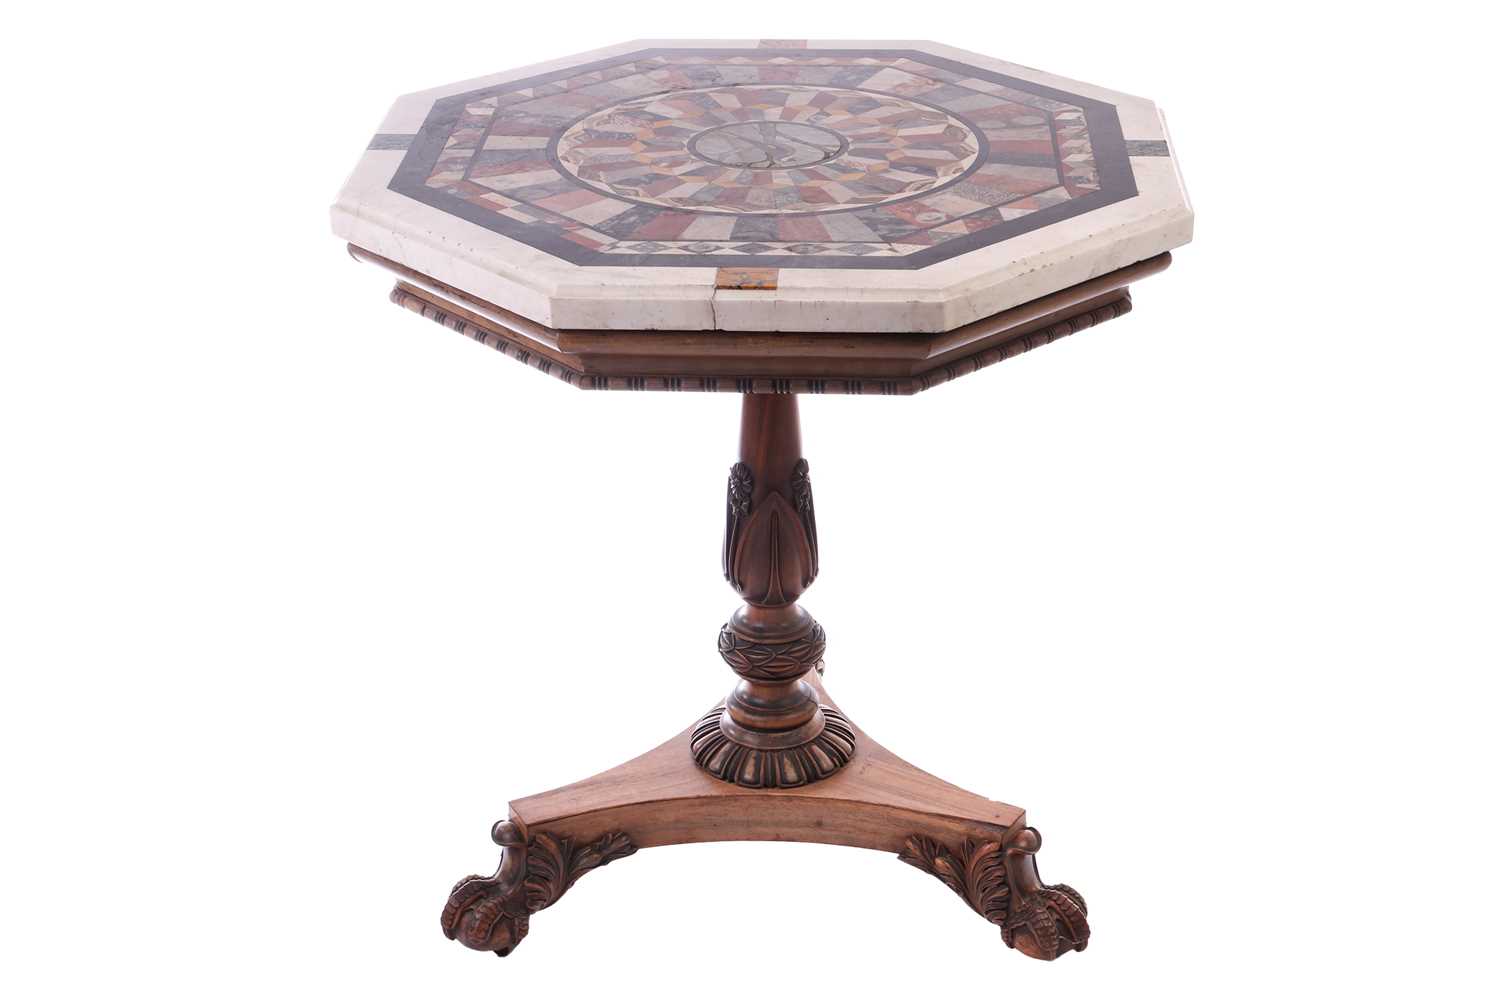 In the Manner of William Trotter, a fine Scottish, George IV carved rosewood and pietra dura marble 